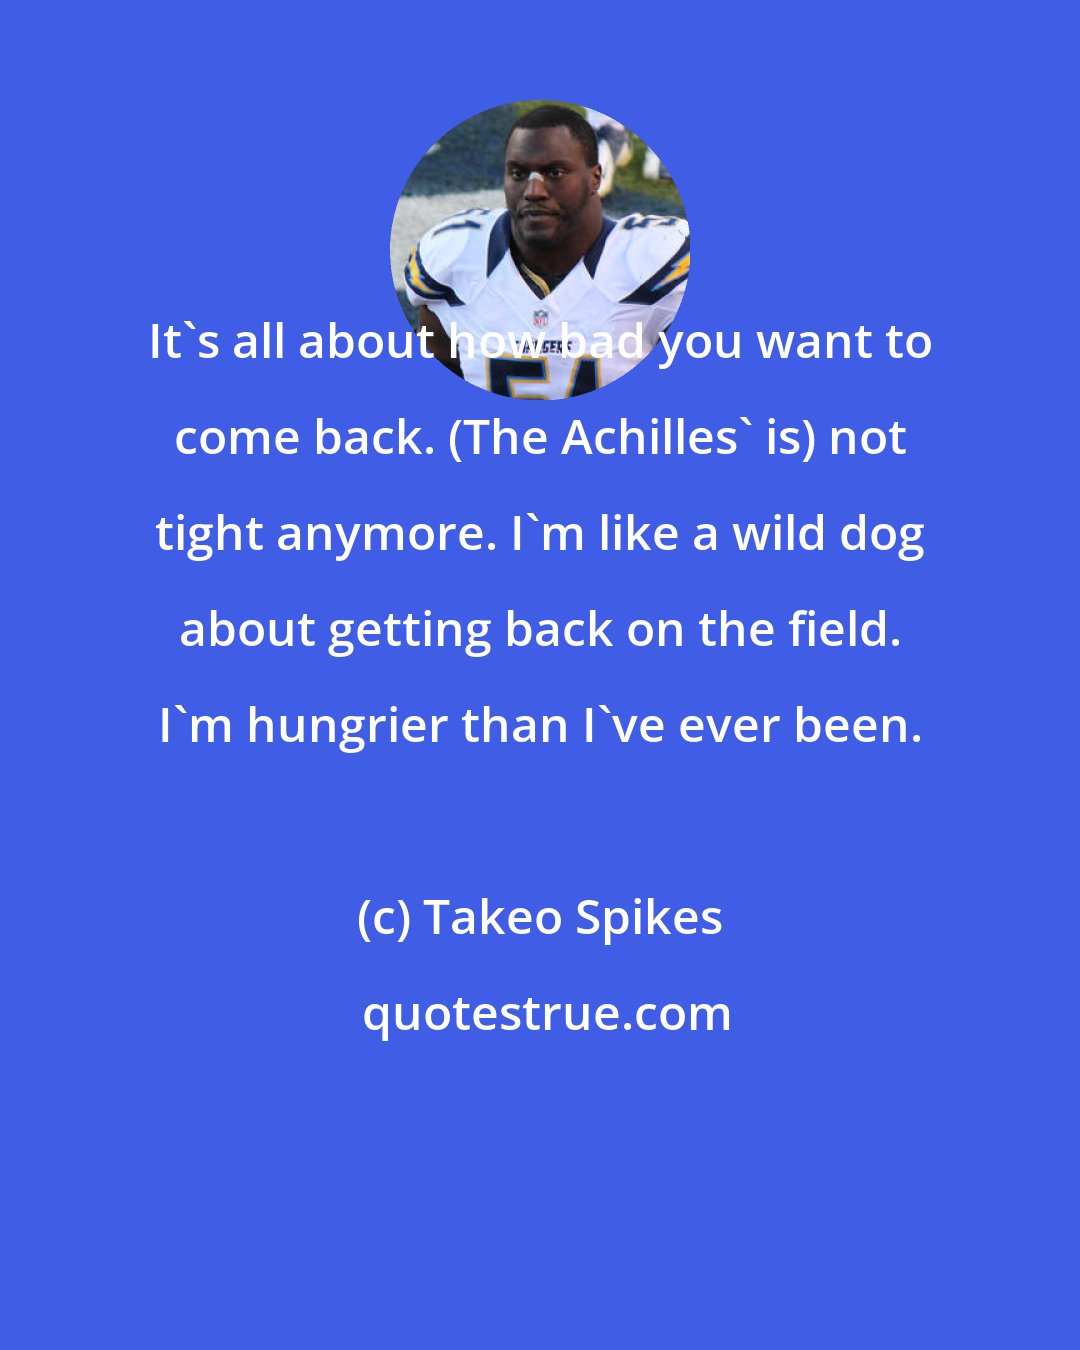 Takeo Spikes: It's all about how bad you want to come back. (The Achilles' is) not tight anymore. I'm like a wild dog about getting back on the field. I'm hungrier than I've ever been.